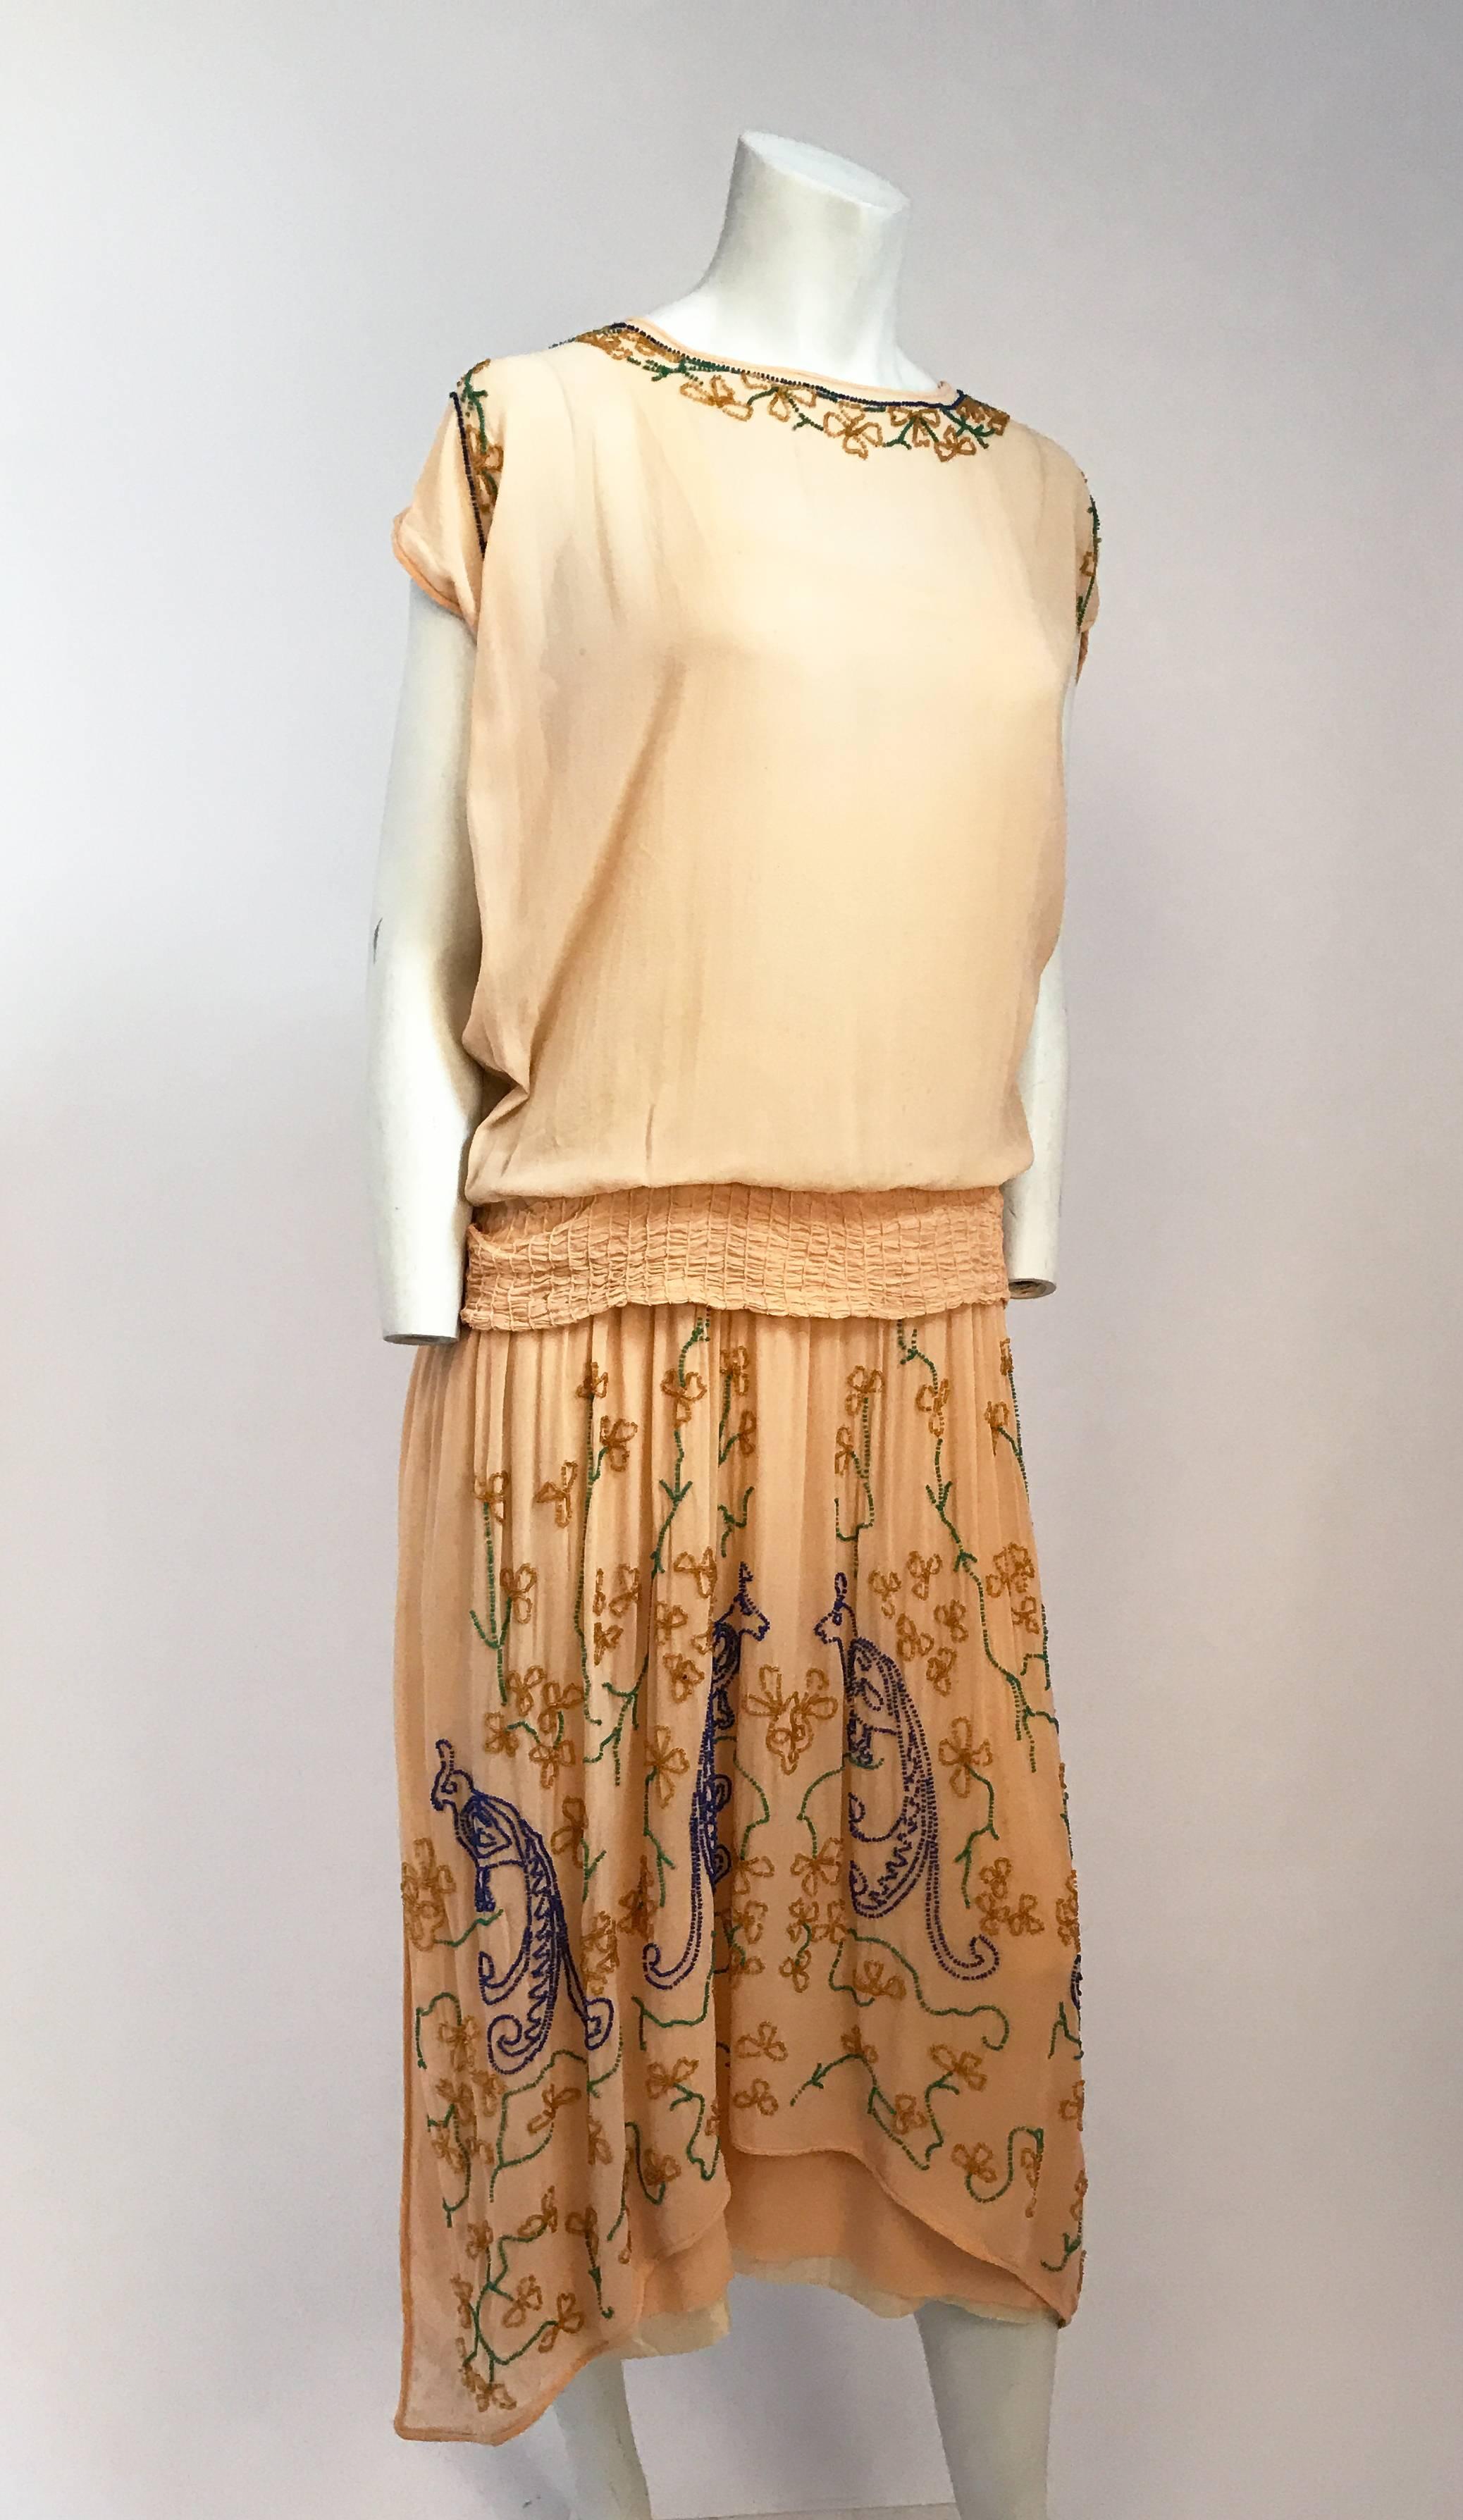 1920's Peach Glass Beaded Drop-waist Dress. Peach Drop-waist dress with multicolored glass beading featuring Peacock design. Smocked waist band that forms bow in the back. Built in lining and short dolman sleeves. Fits US Dress Size 5-6. 